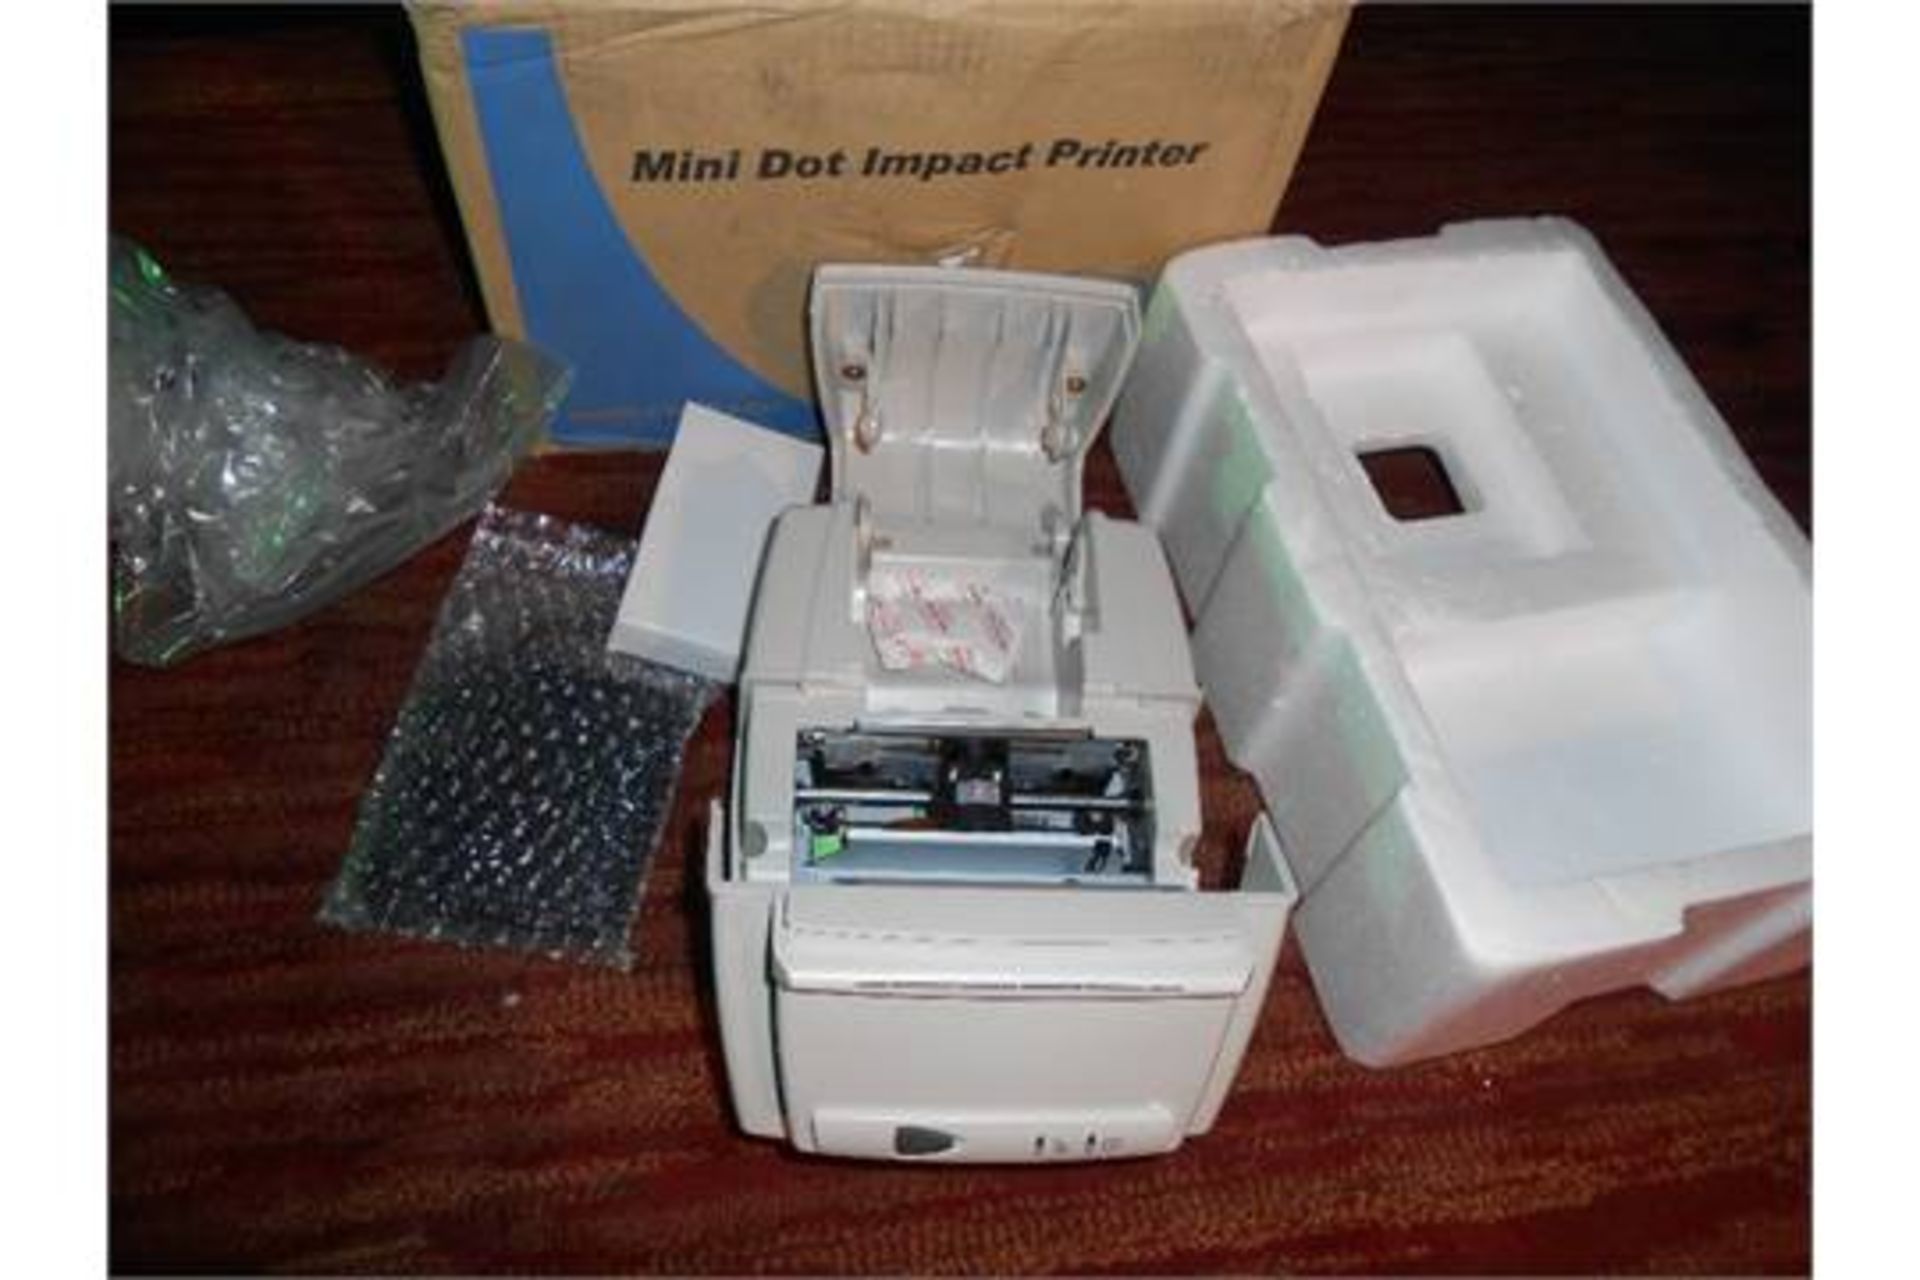 Brand New Mini Dot Impact Printer For Epos Till System Or Kitchen Printer For Food Orders With Ink - Image 2 of 2